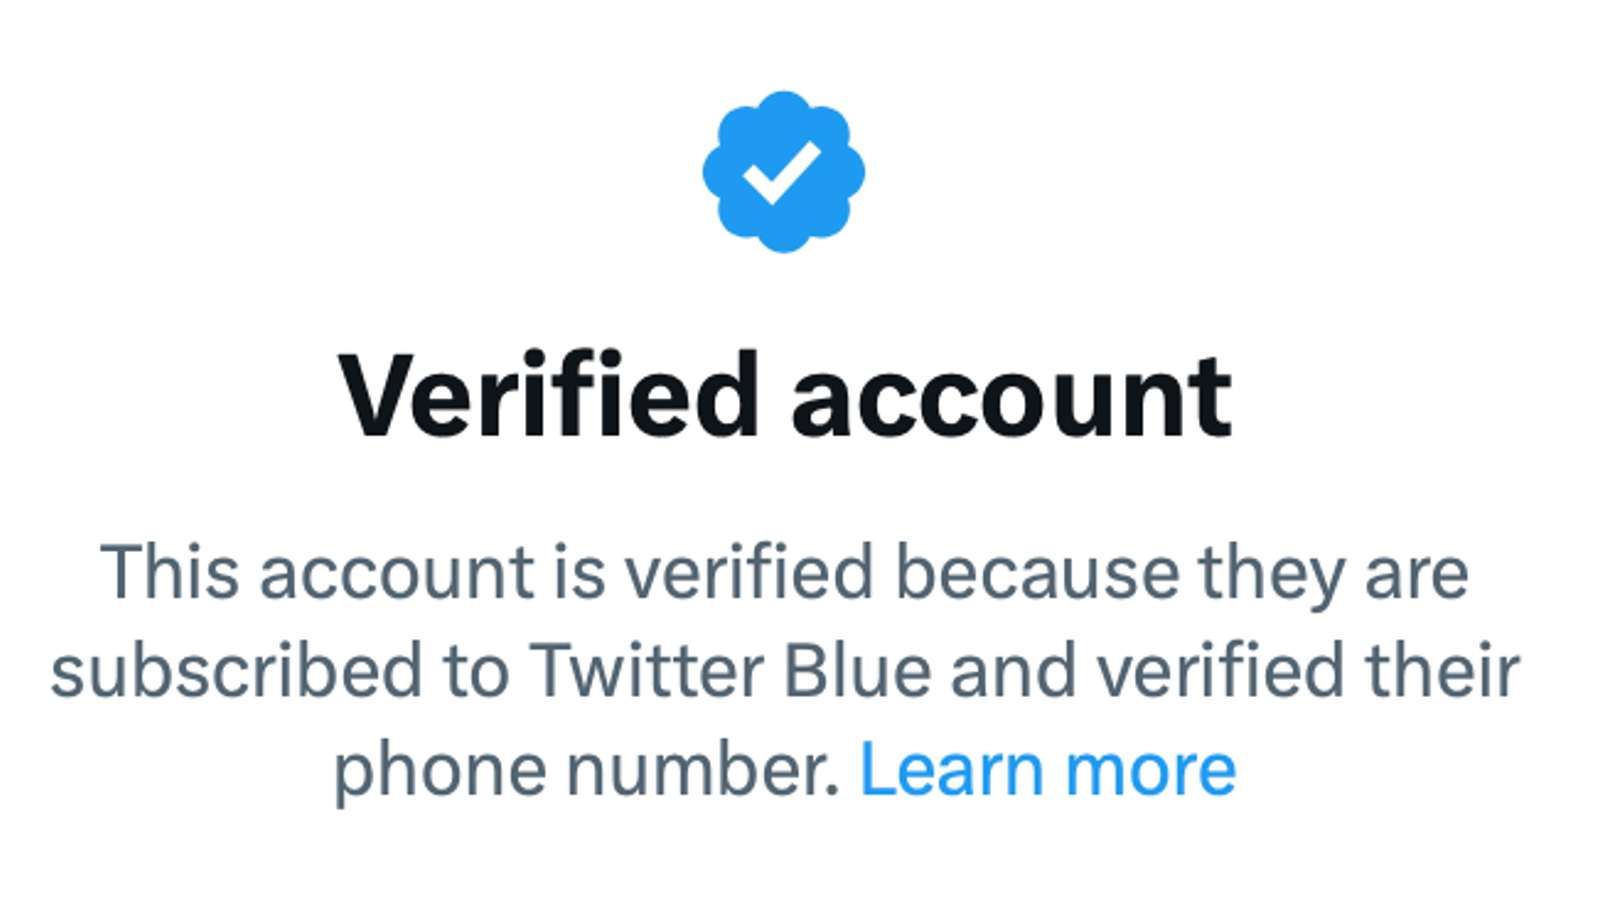 Elon Musk’s Twitter Blue Tick Purge, Who’s Still Verified and Who’s Not?